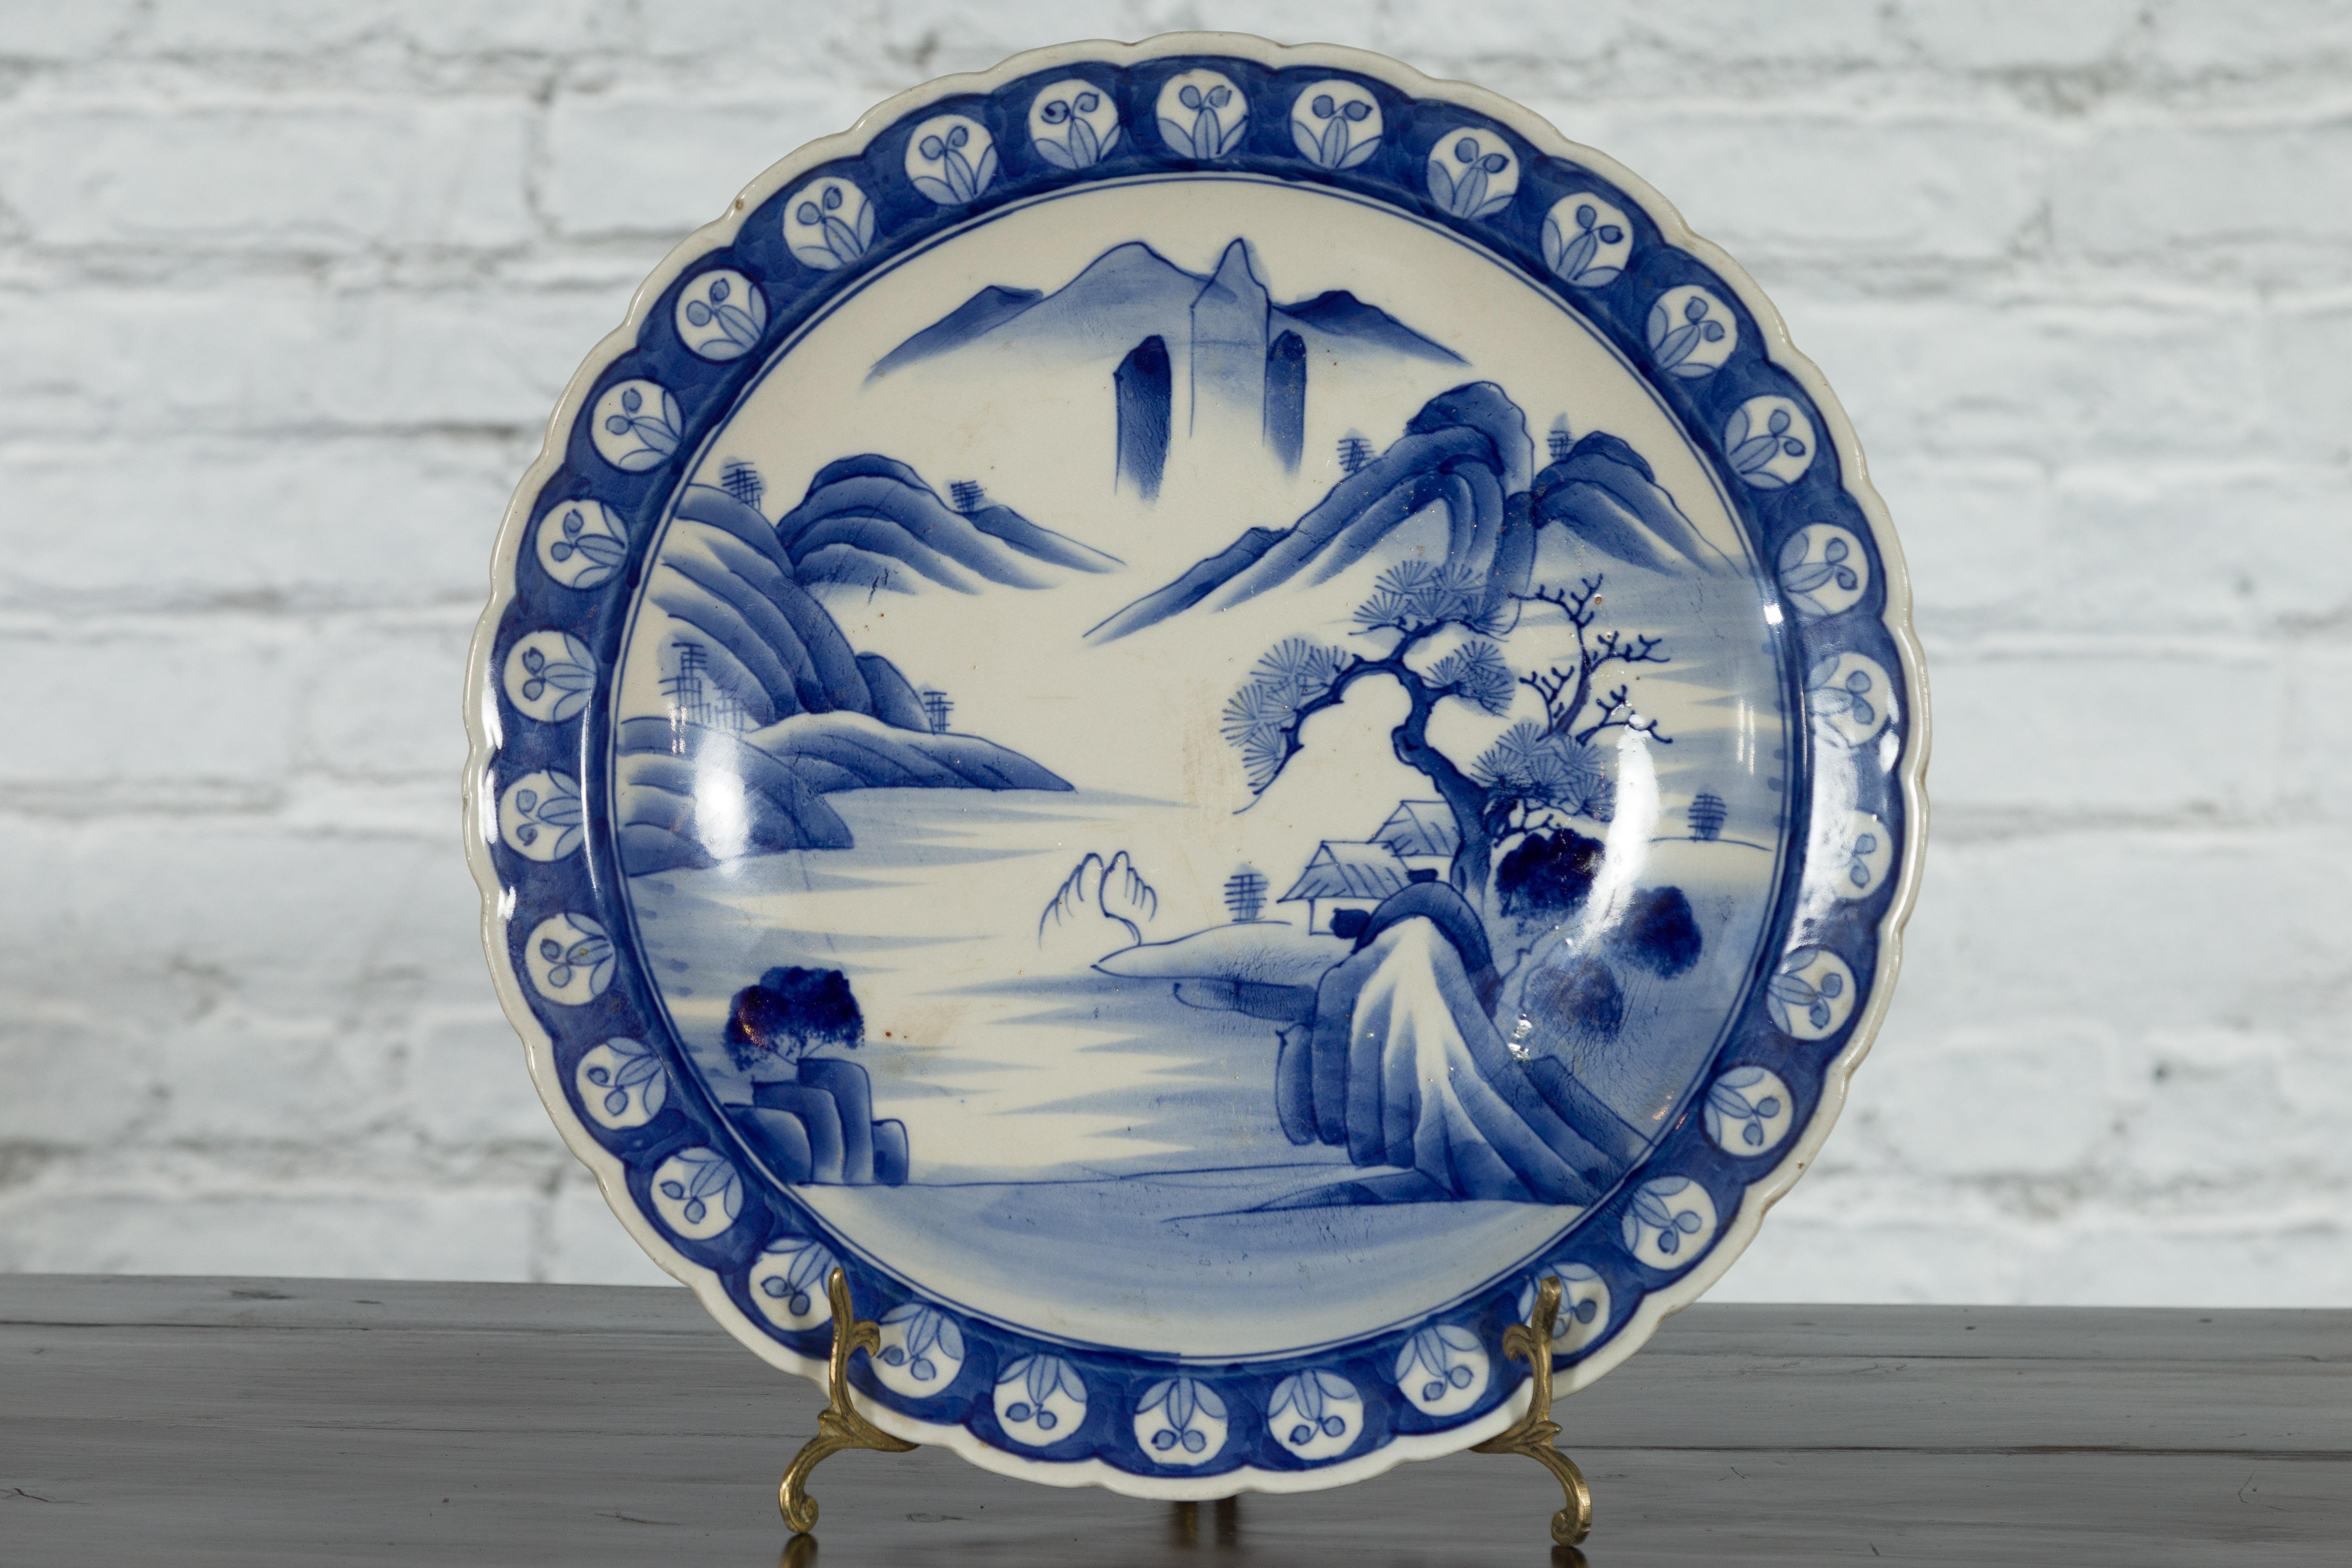 A Japanese porcelain plate from the 19th century, with hand-painted blue and white mountainous landscape and architecture décor. Created in Japan during the 19th century, this porcelain plate features a delicate blue and white décor depicting an